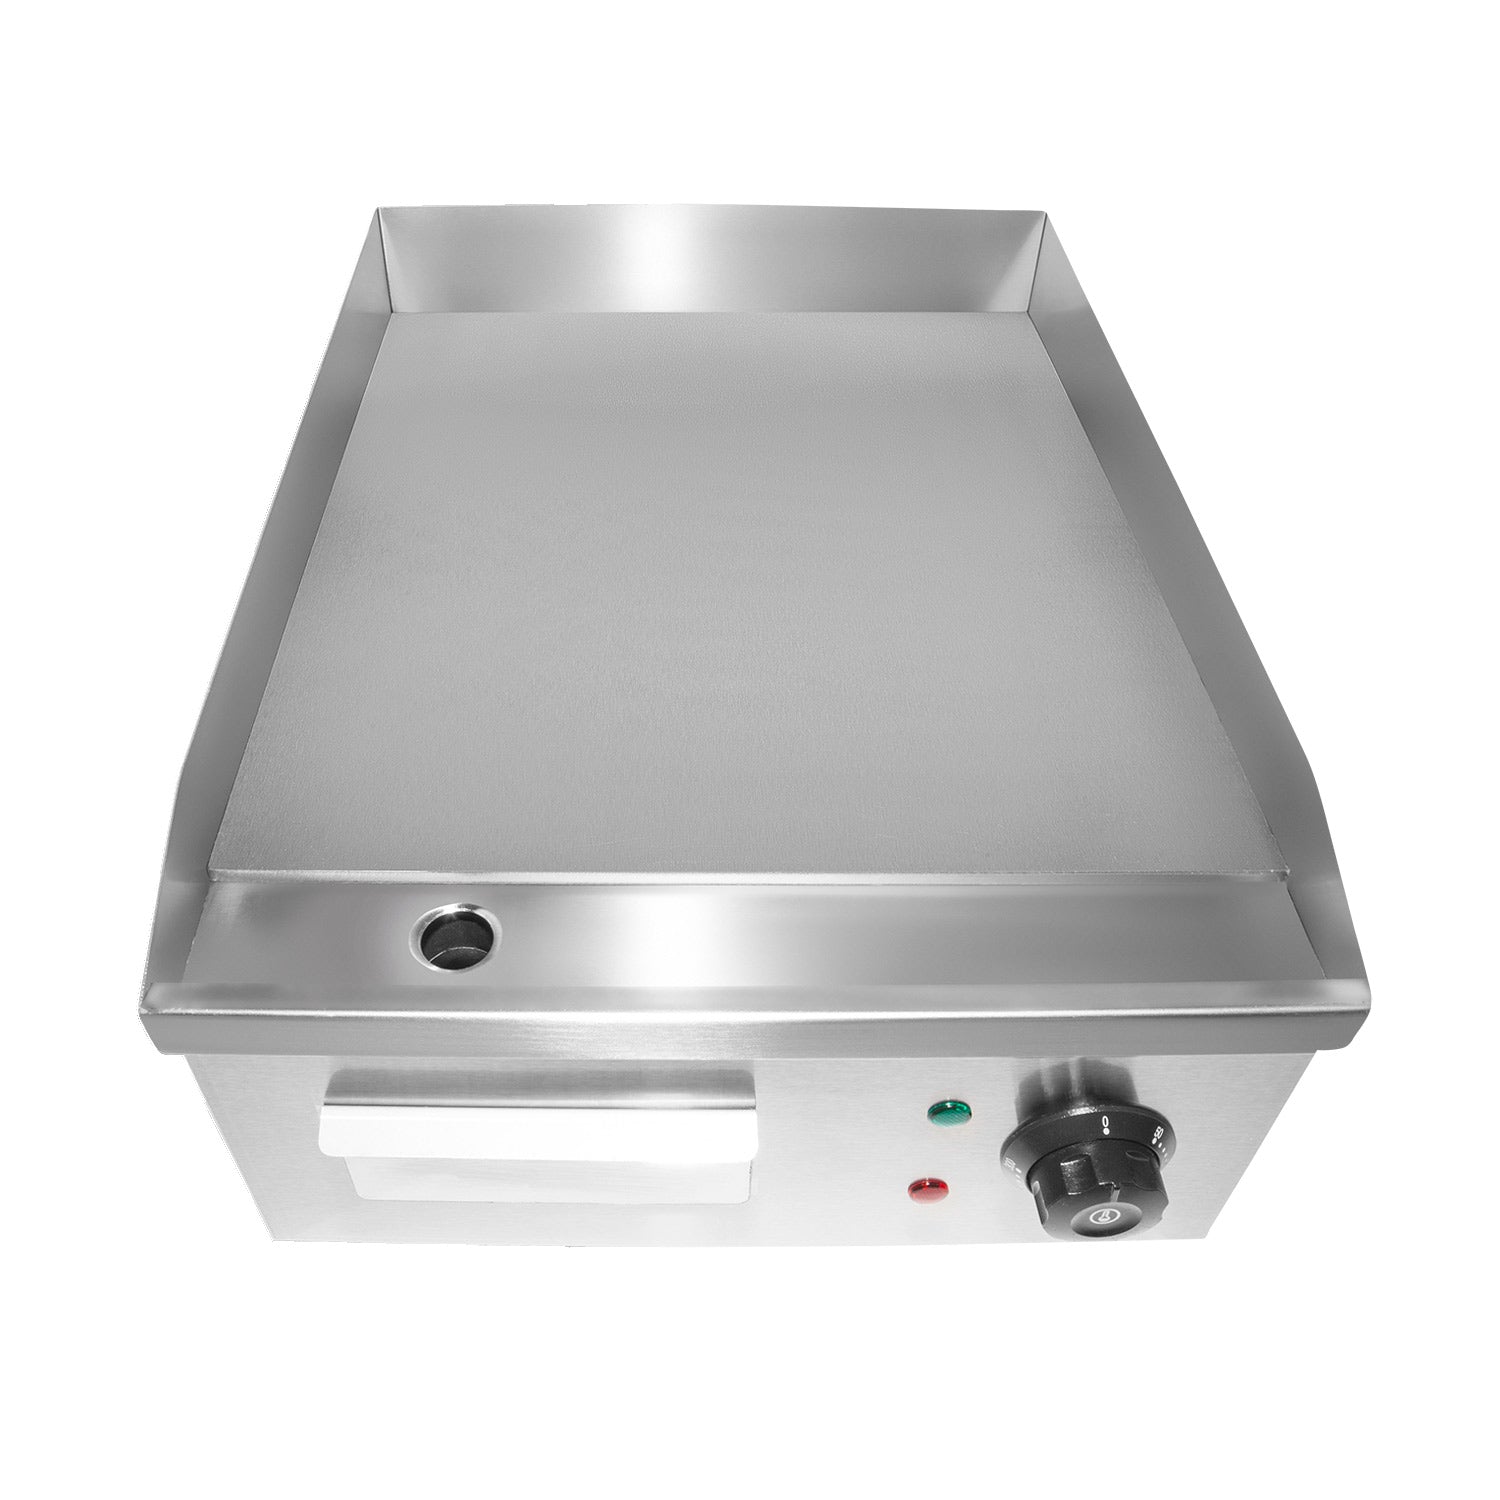 ALDKitchen Flat Top Griddle, Electric Griddle with Manual Control, Teppanyaki Grill